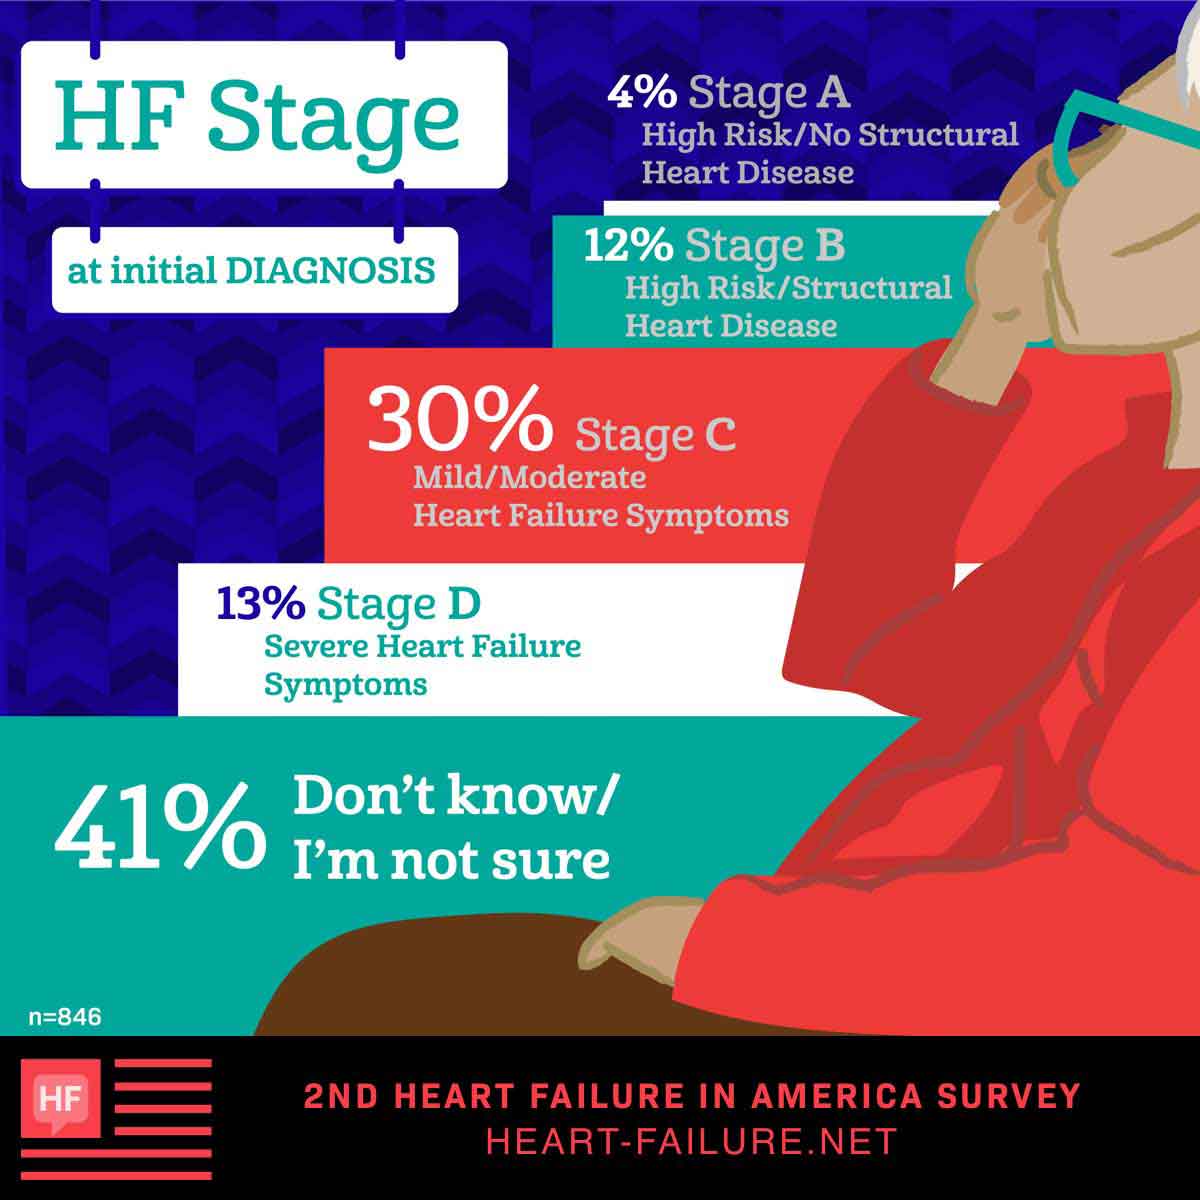 HF stage at initial diagnosis: Stage A, high-risk/no structural heart disease: 4%, Stage B, high-risk/structural heart disease: 12%, Stage C, mild/moderate heart failure symptoms: 30% Stage D, severe heart failure symptoms: 13%, I don’t know/I’m not sure: 41%